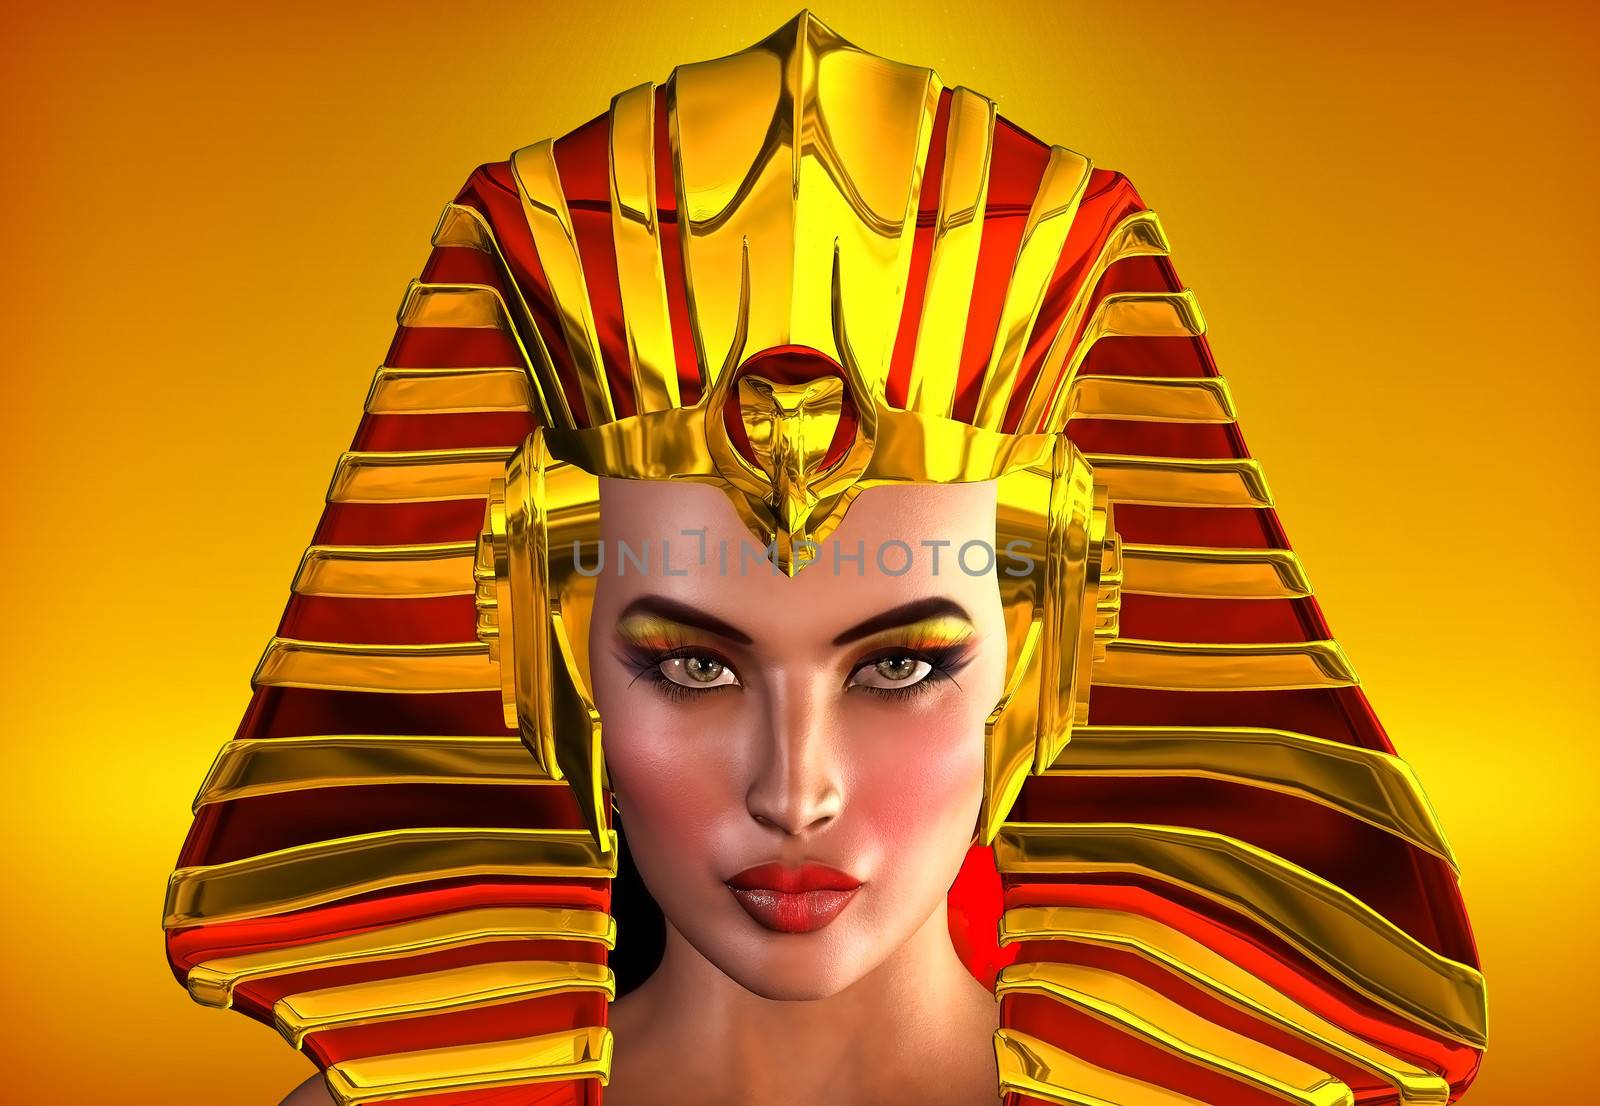 This is a concept art portrait of a female pharaoh of Egypt. Inspiration for use as Hatshepsut, Nefertiti, Cleopatra, or to portray any ancient Egyptian queen.